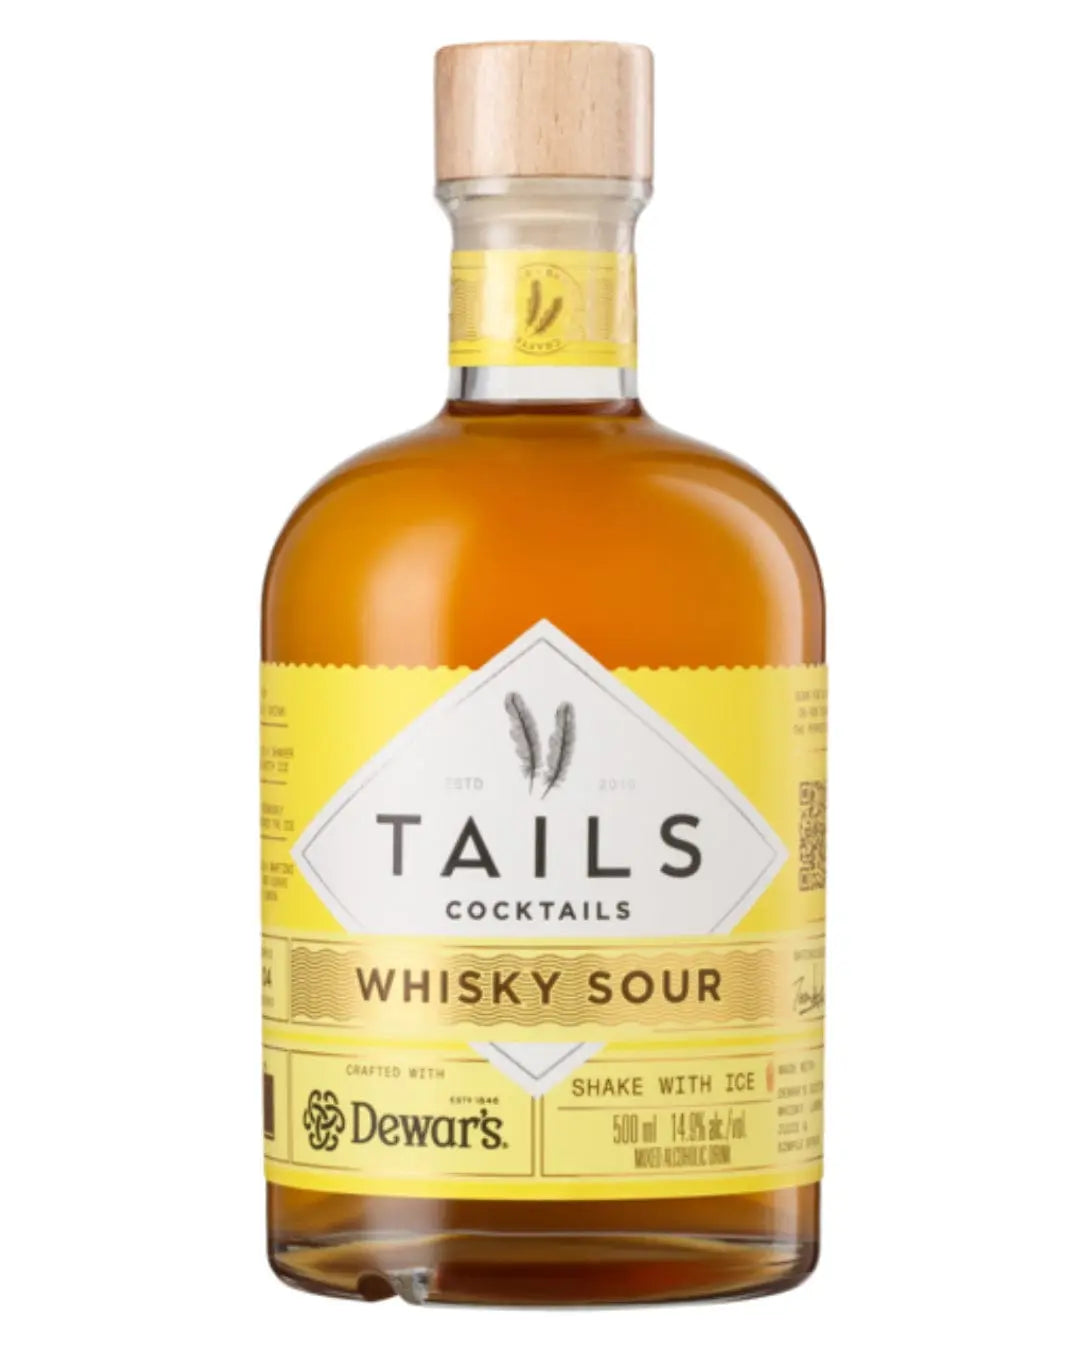 Tails Cocktail Whisky Sour, 50 cl Ready Made Cocktails